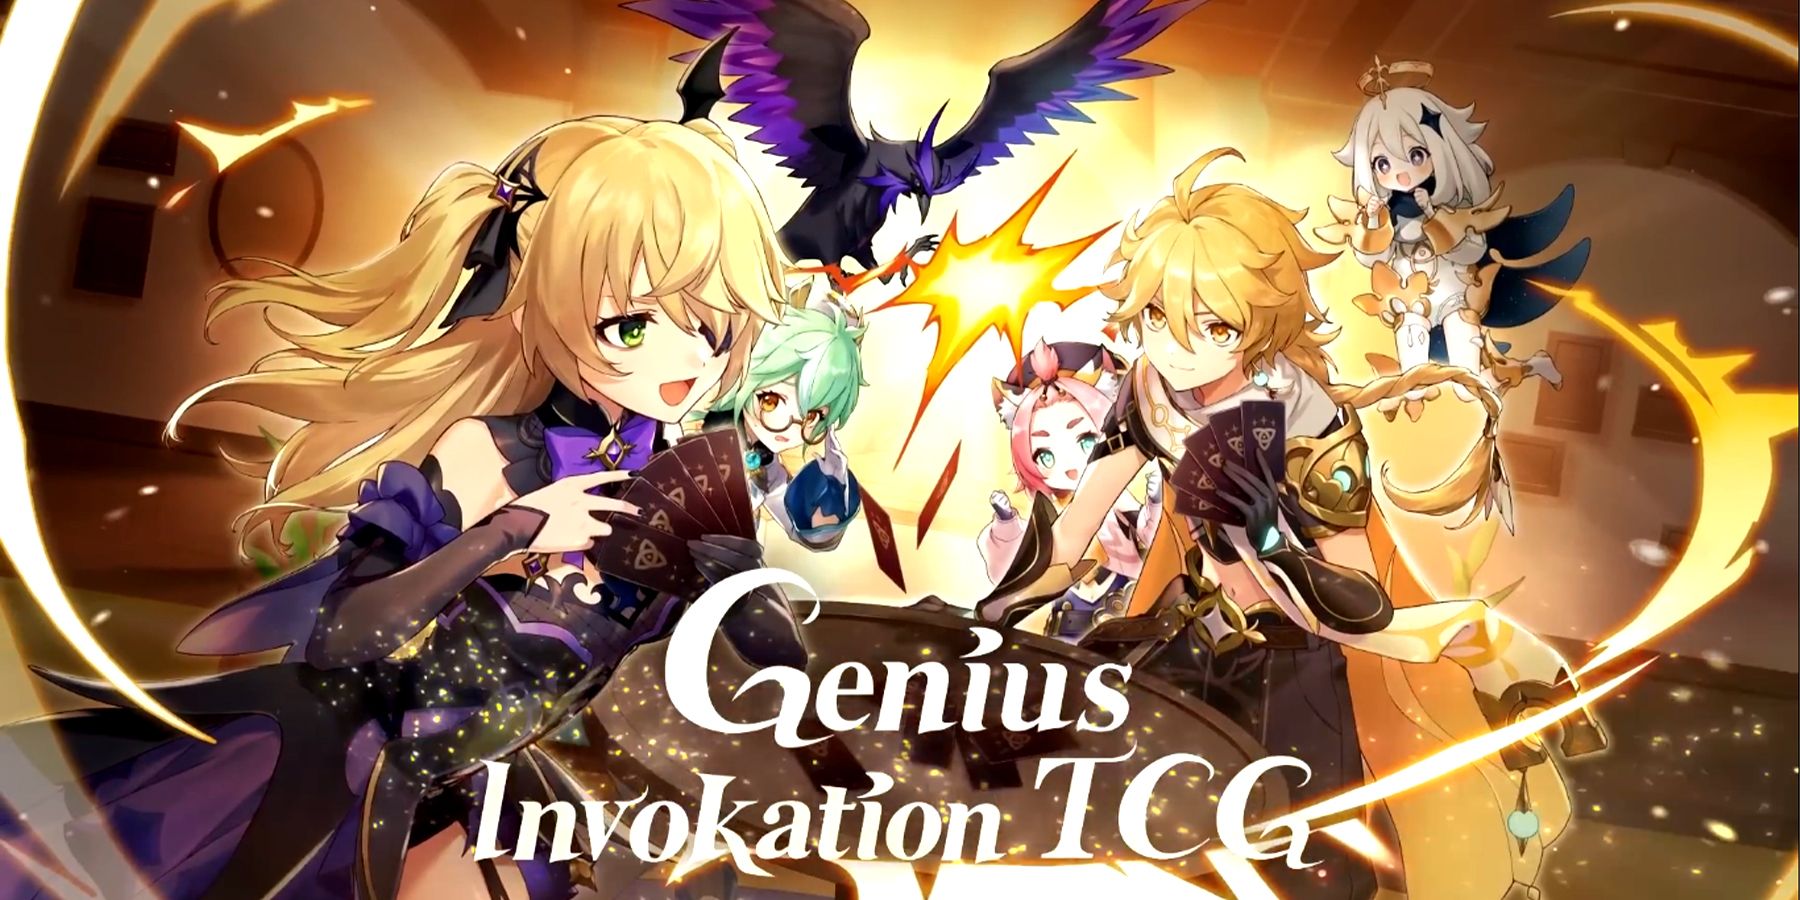 how to get player exp and increase player level in genshin impact genius invokation tcg